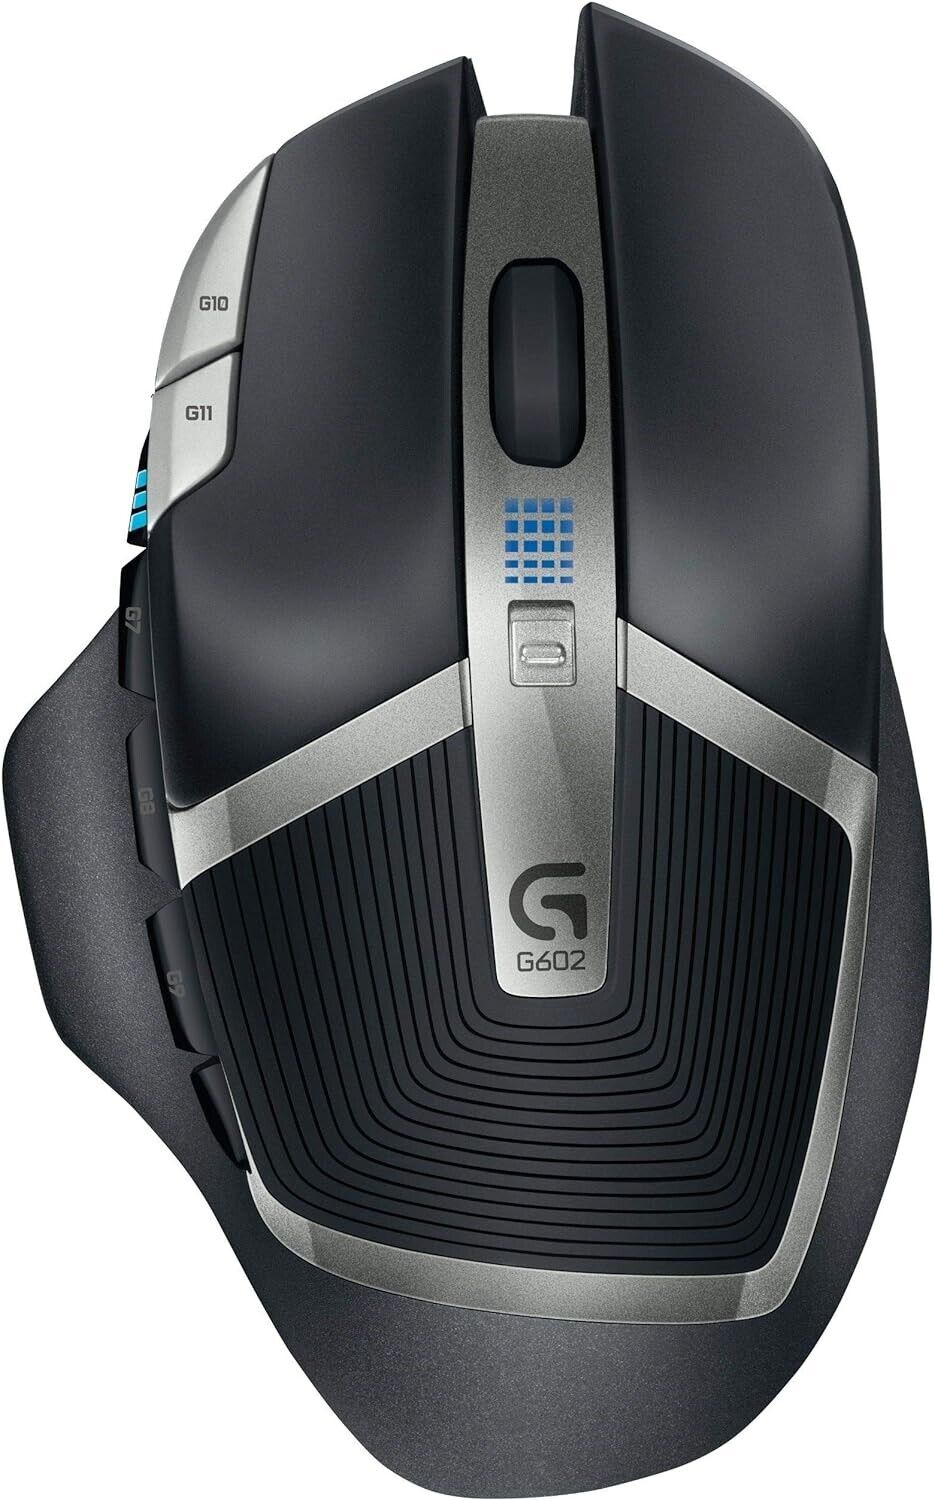 Logitech G602 Lag-Free Wireless Gaming Mouse 11 Programmable Buttons, Up to 2500